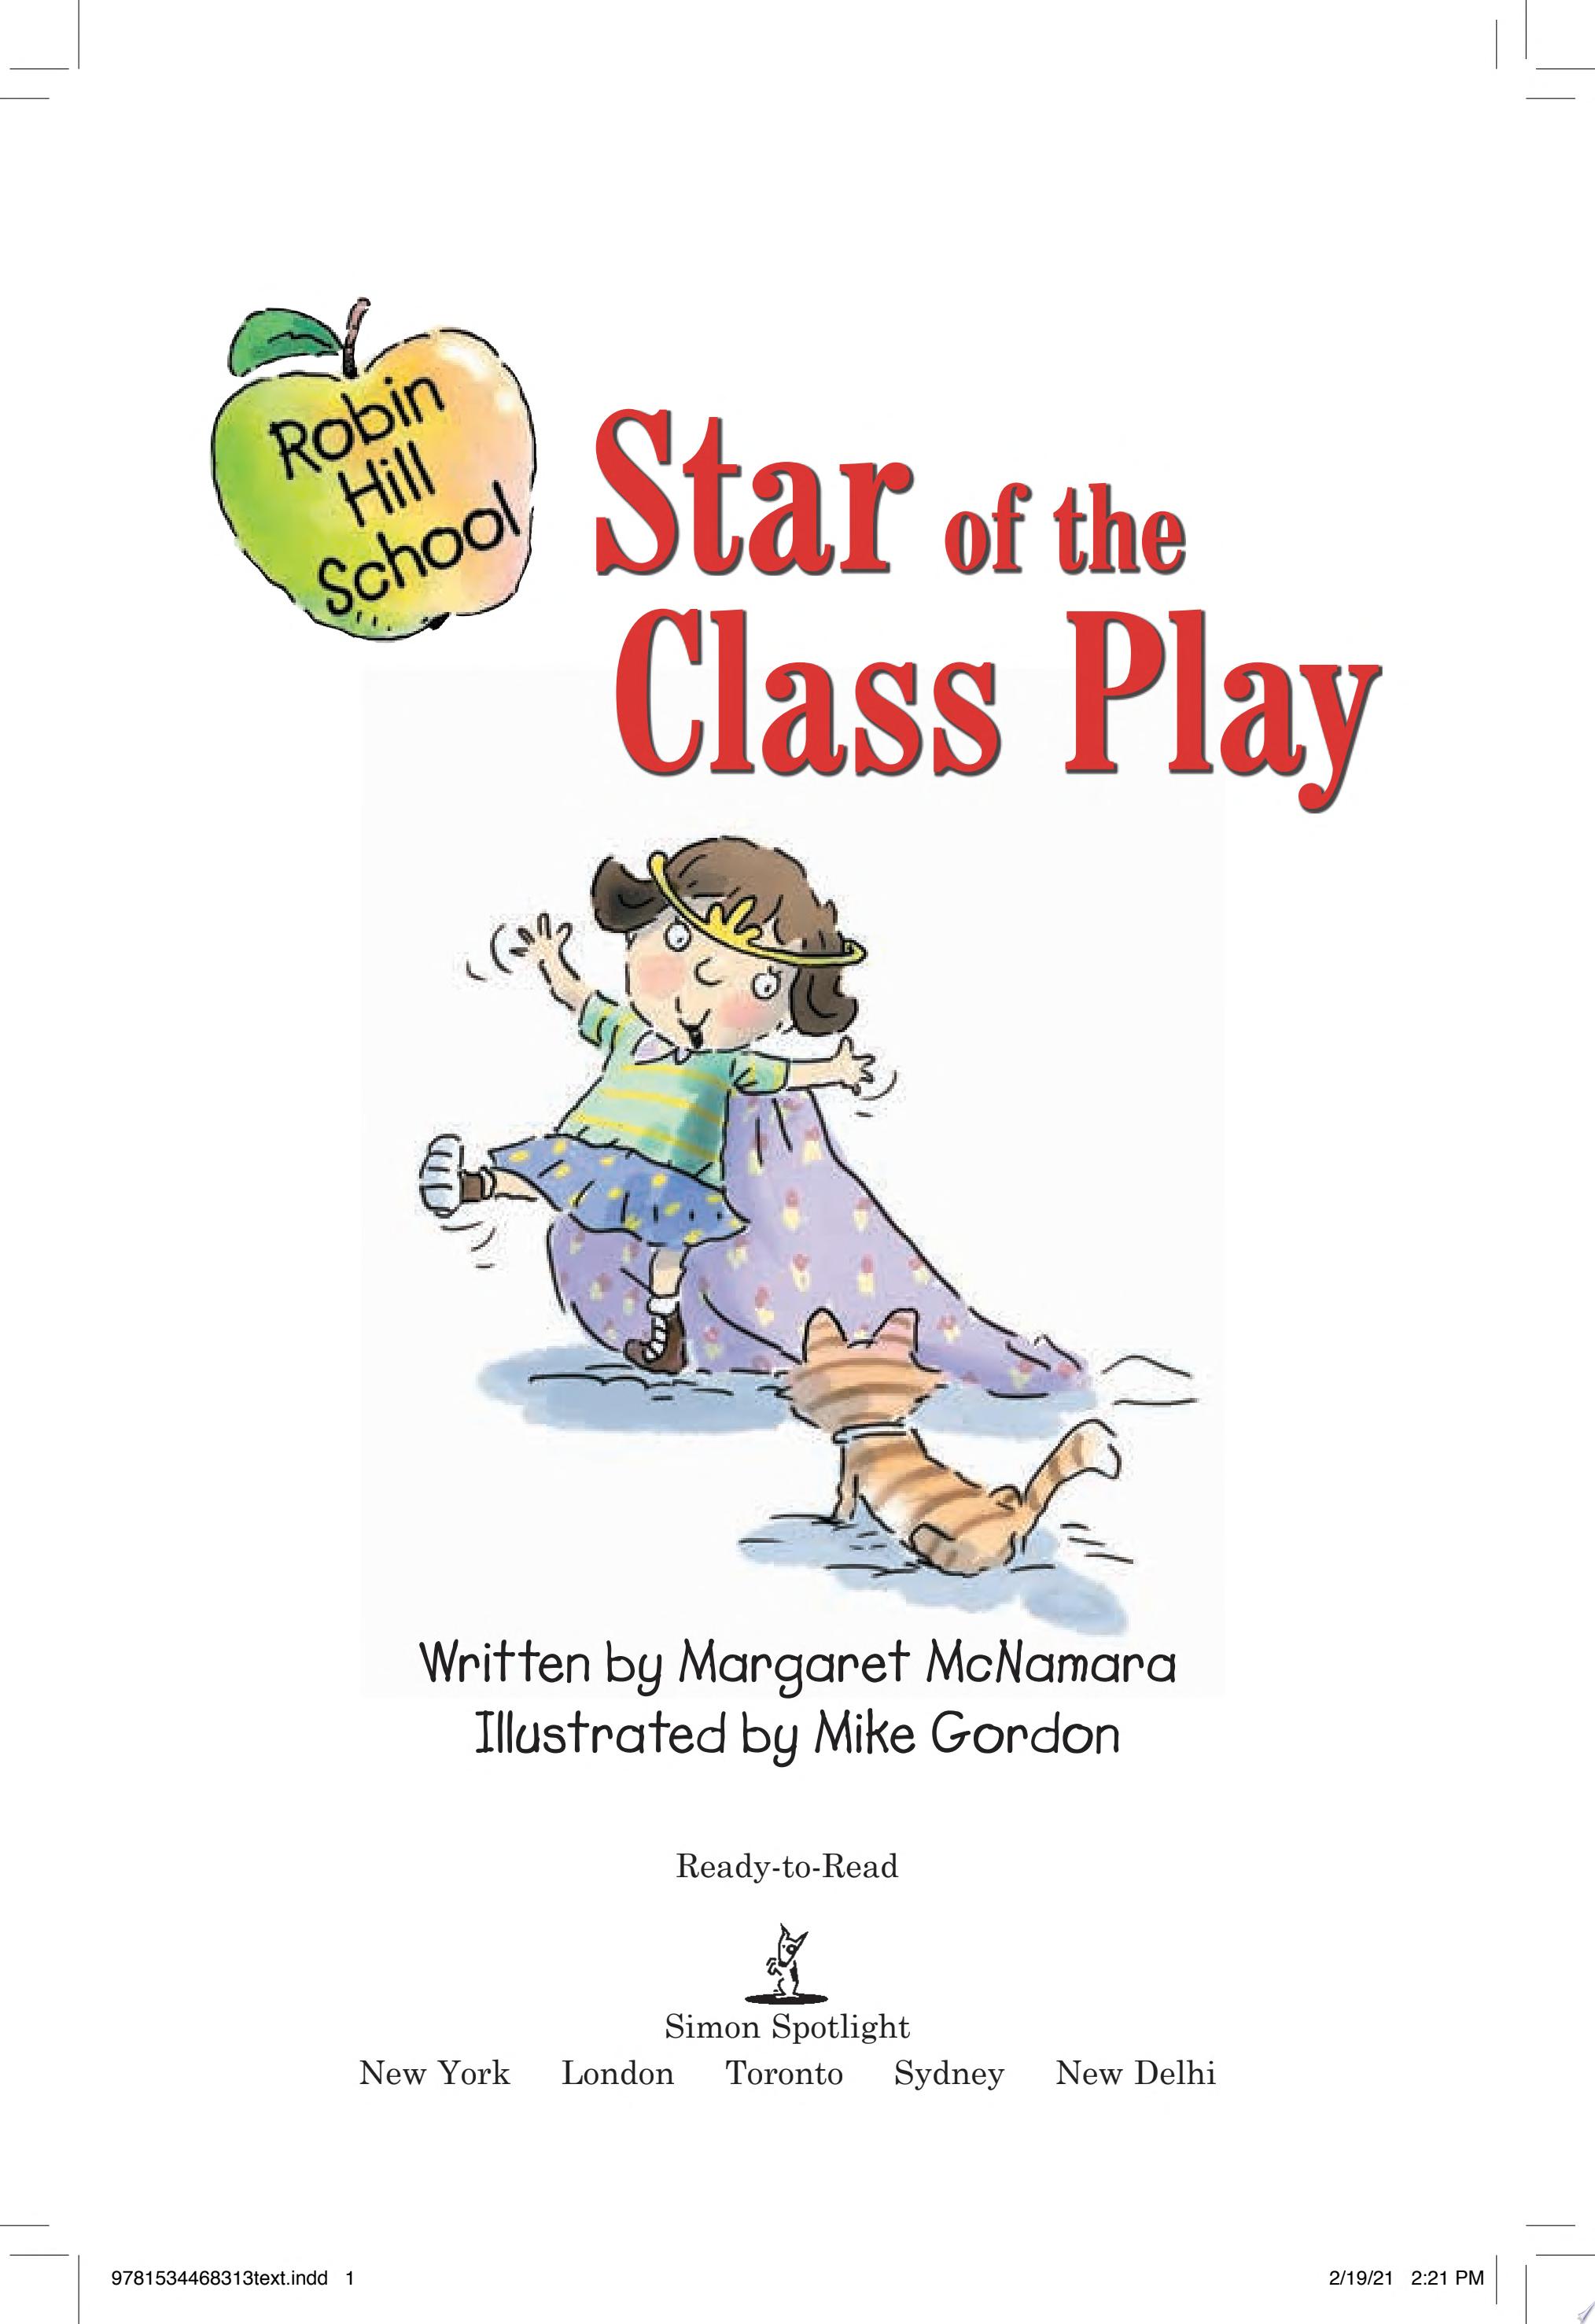 Image for "Star of the Class Play"